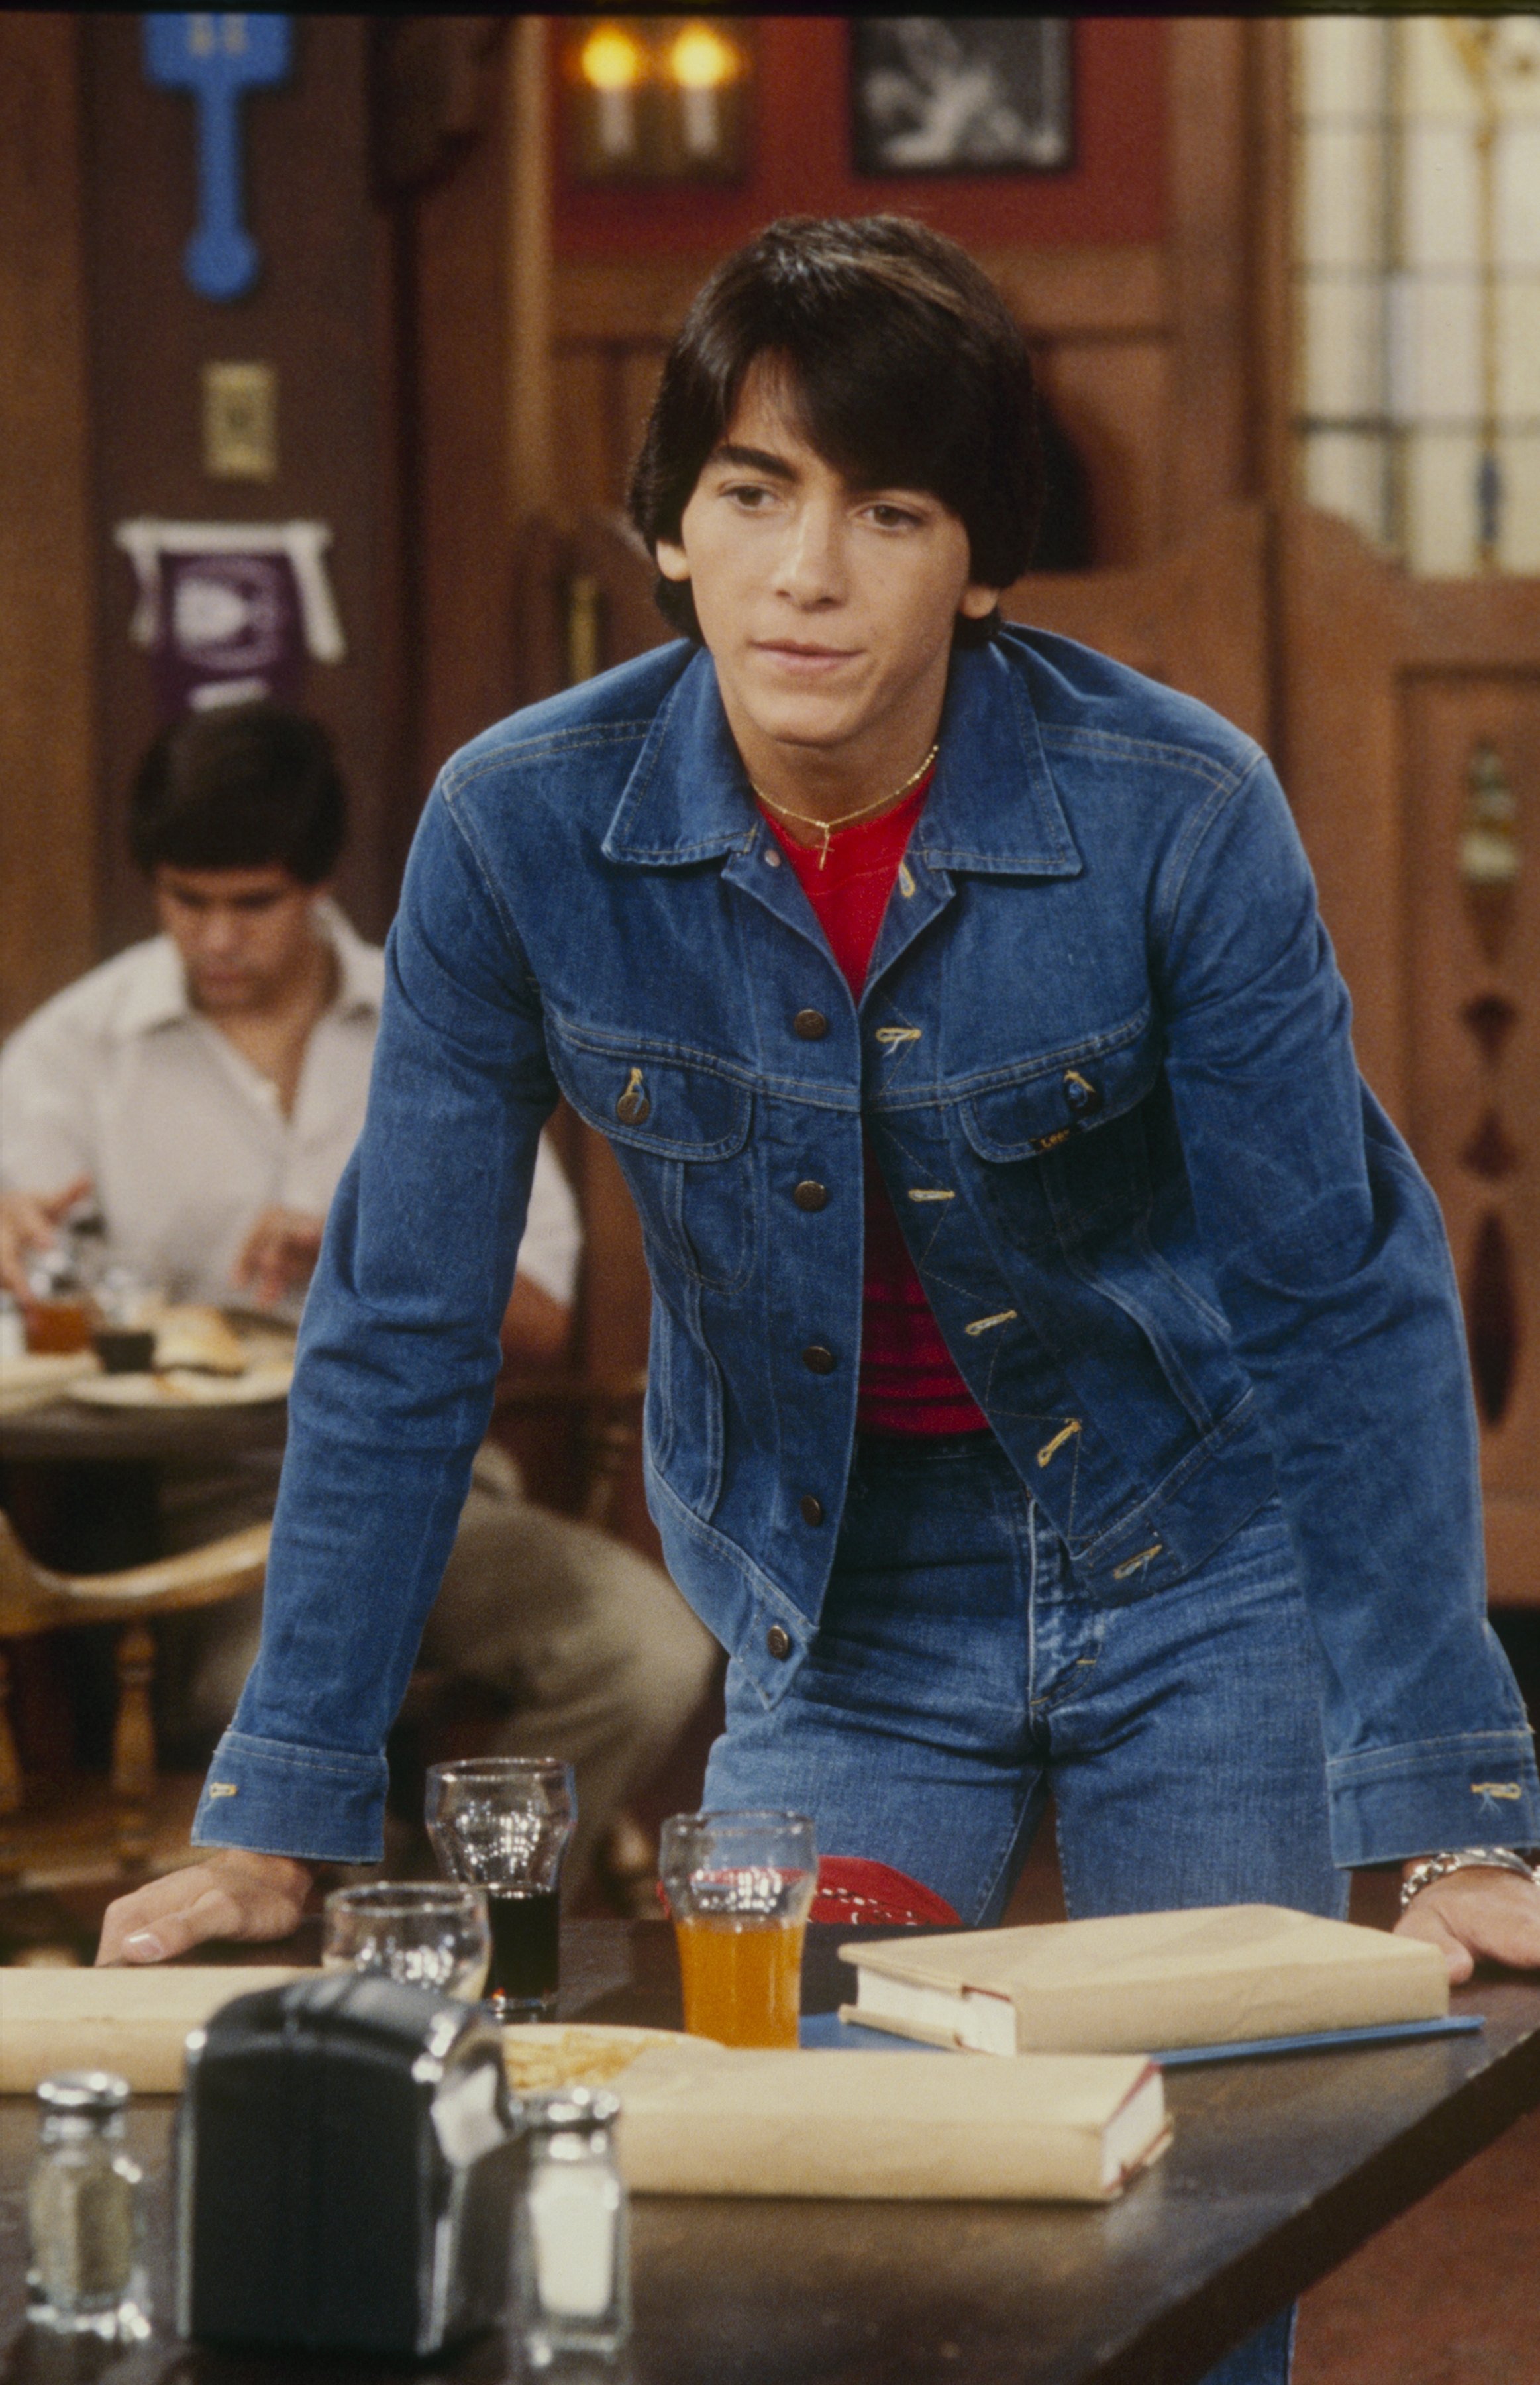 Scott Baio in the episode, "Another Night at Antoine's" of the sitcom "Happy Days" aired on on October 27, 1981 | Source: Getty Images